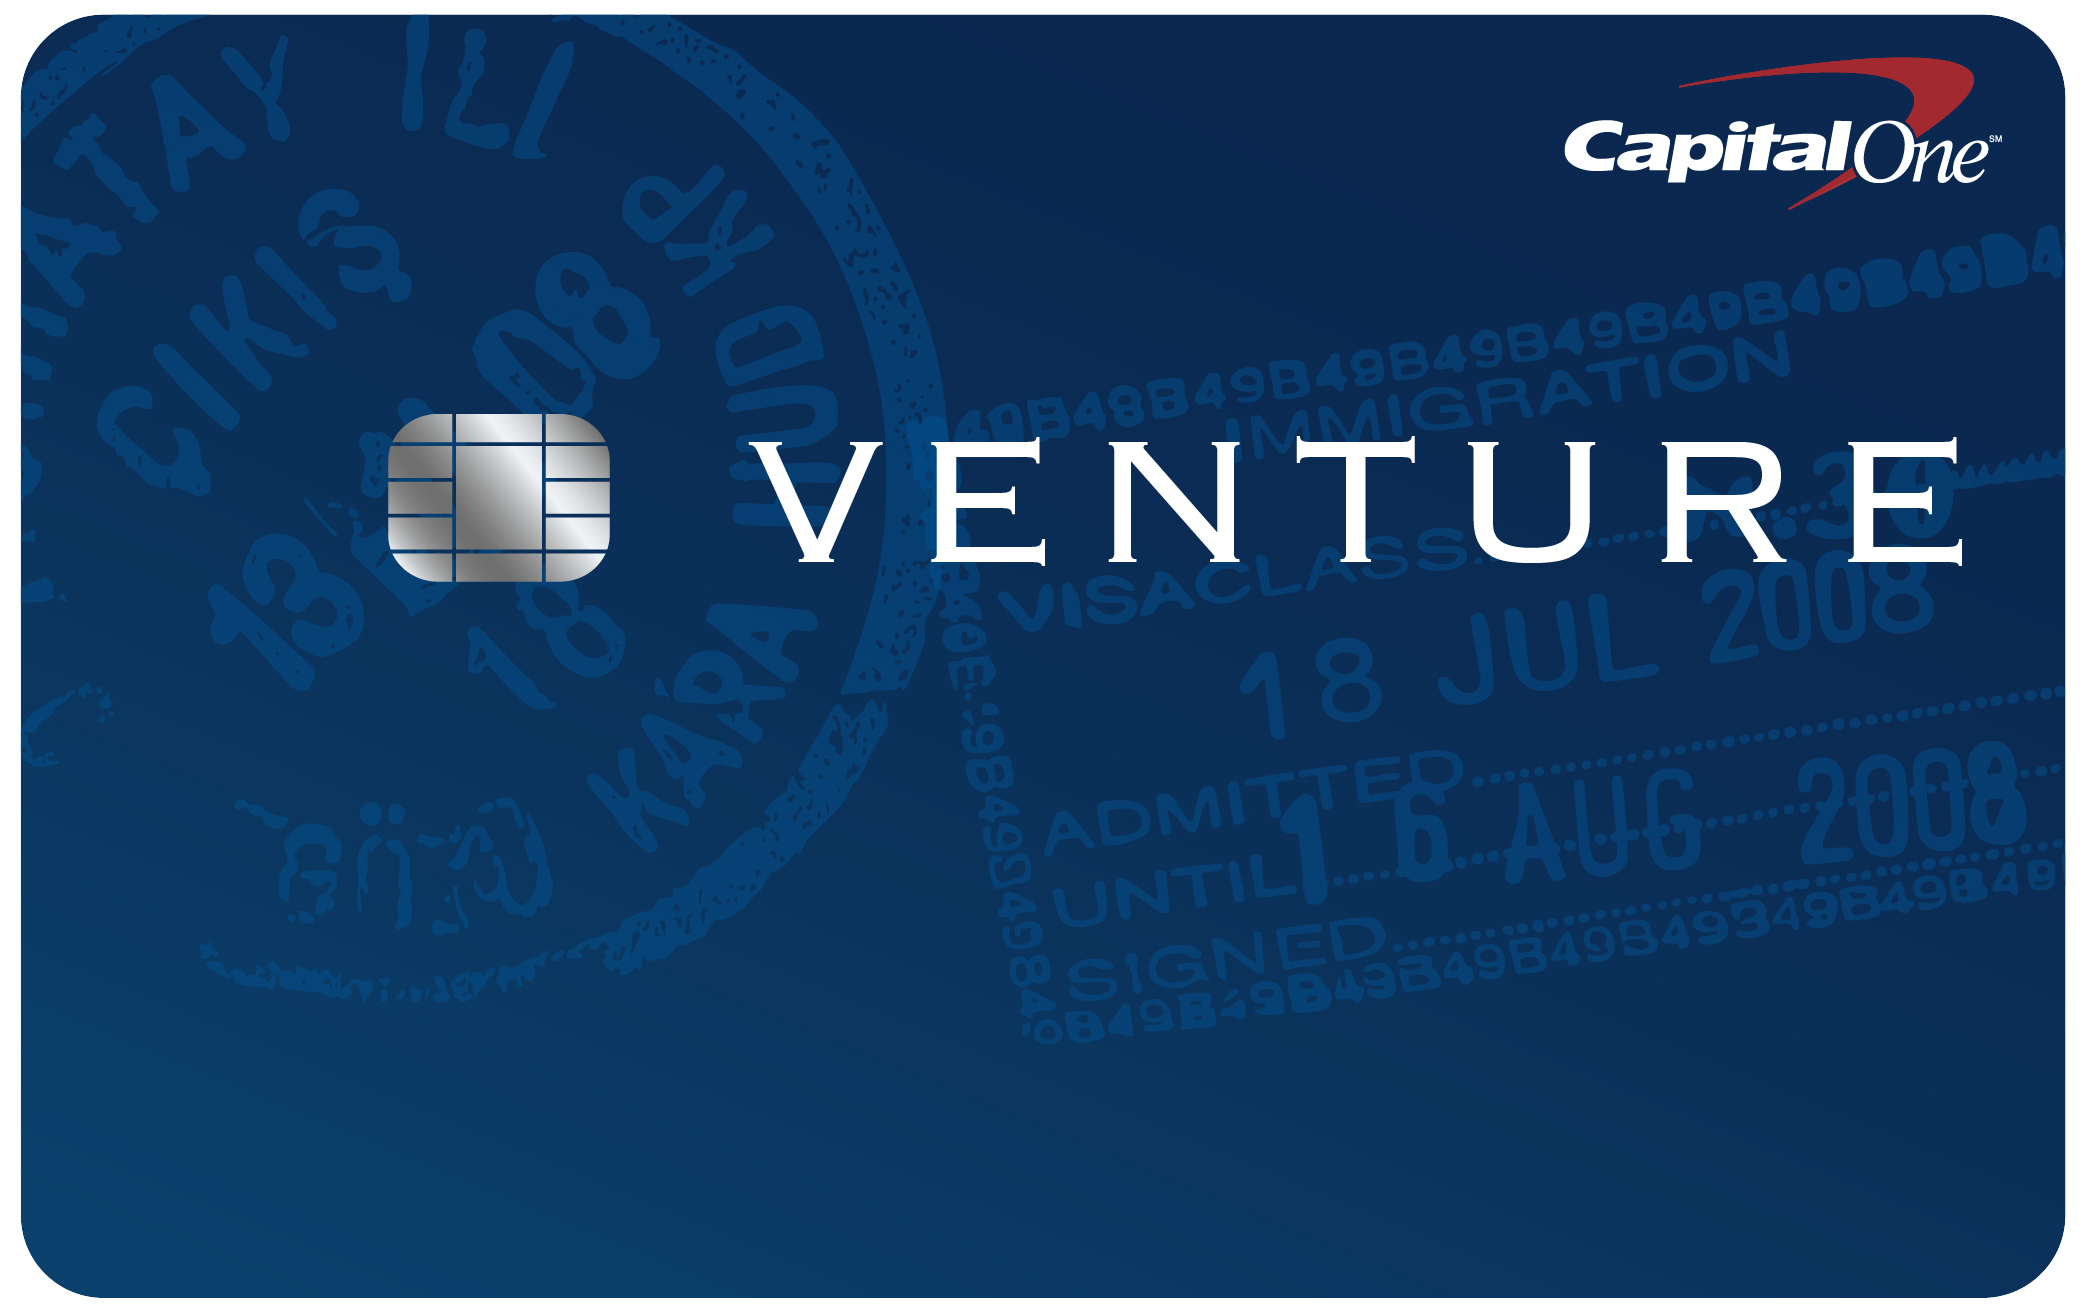 capital-one-ventureone-rewards-credit-card-point-me-to-the-plane